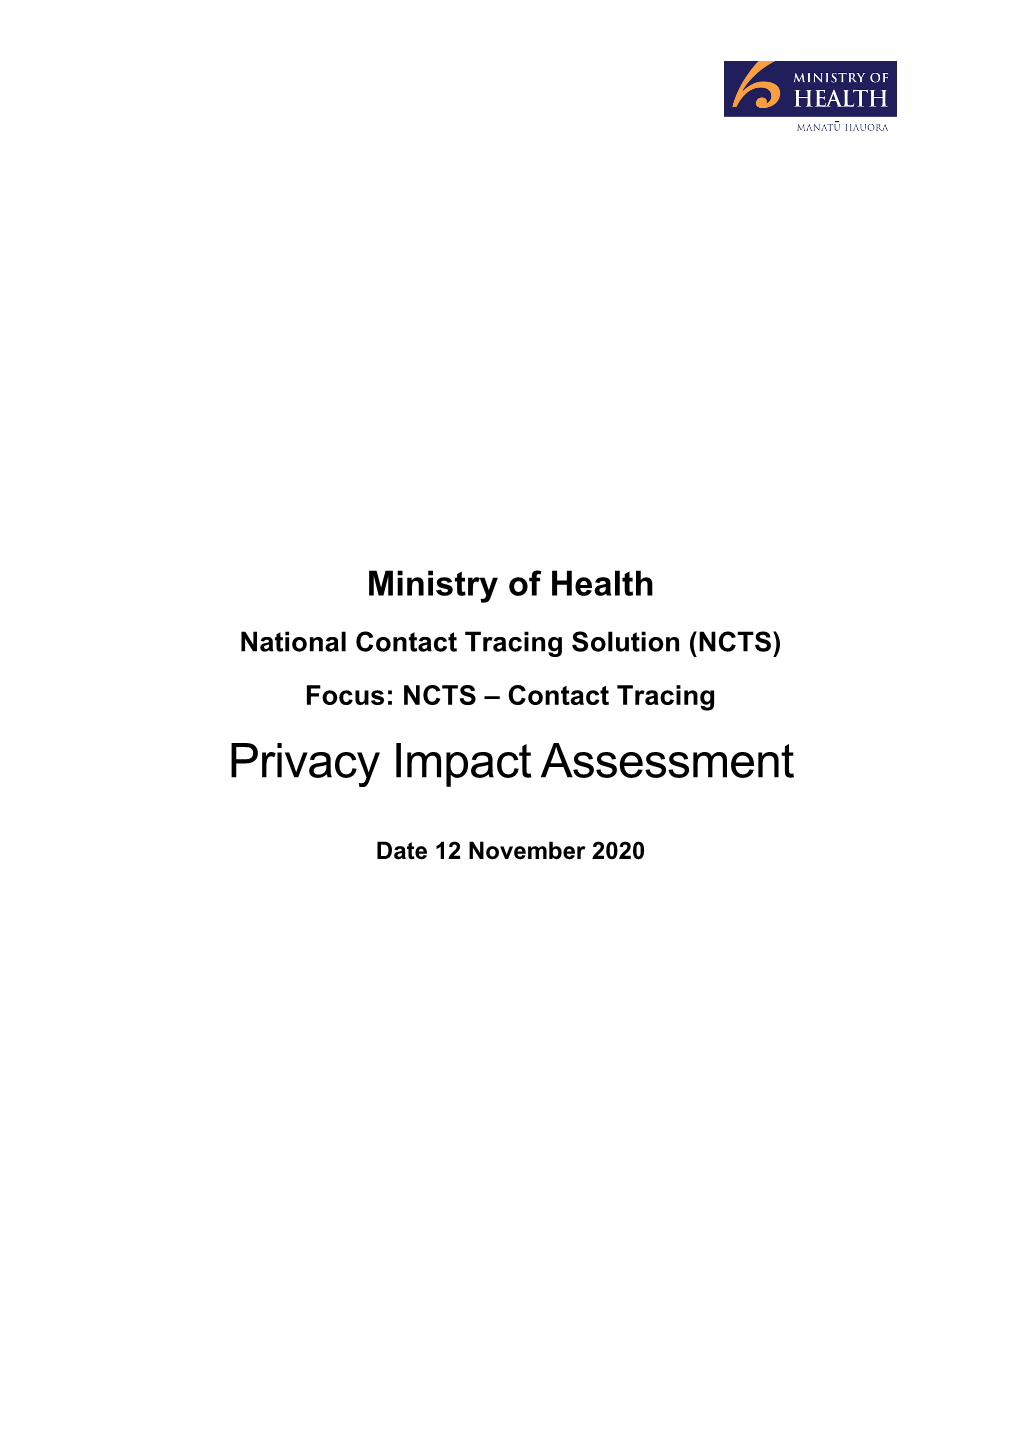 Focus: NCTS – Contact Tracing Privacy Impact Assessment